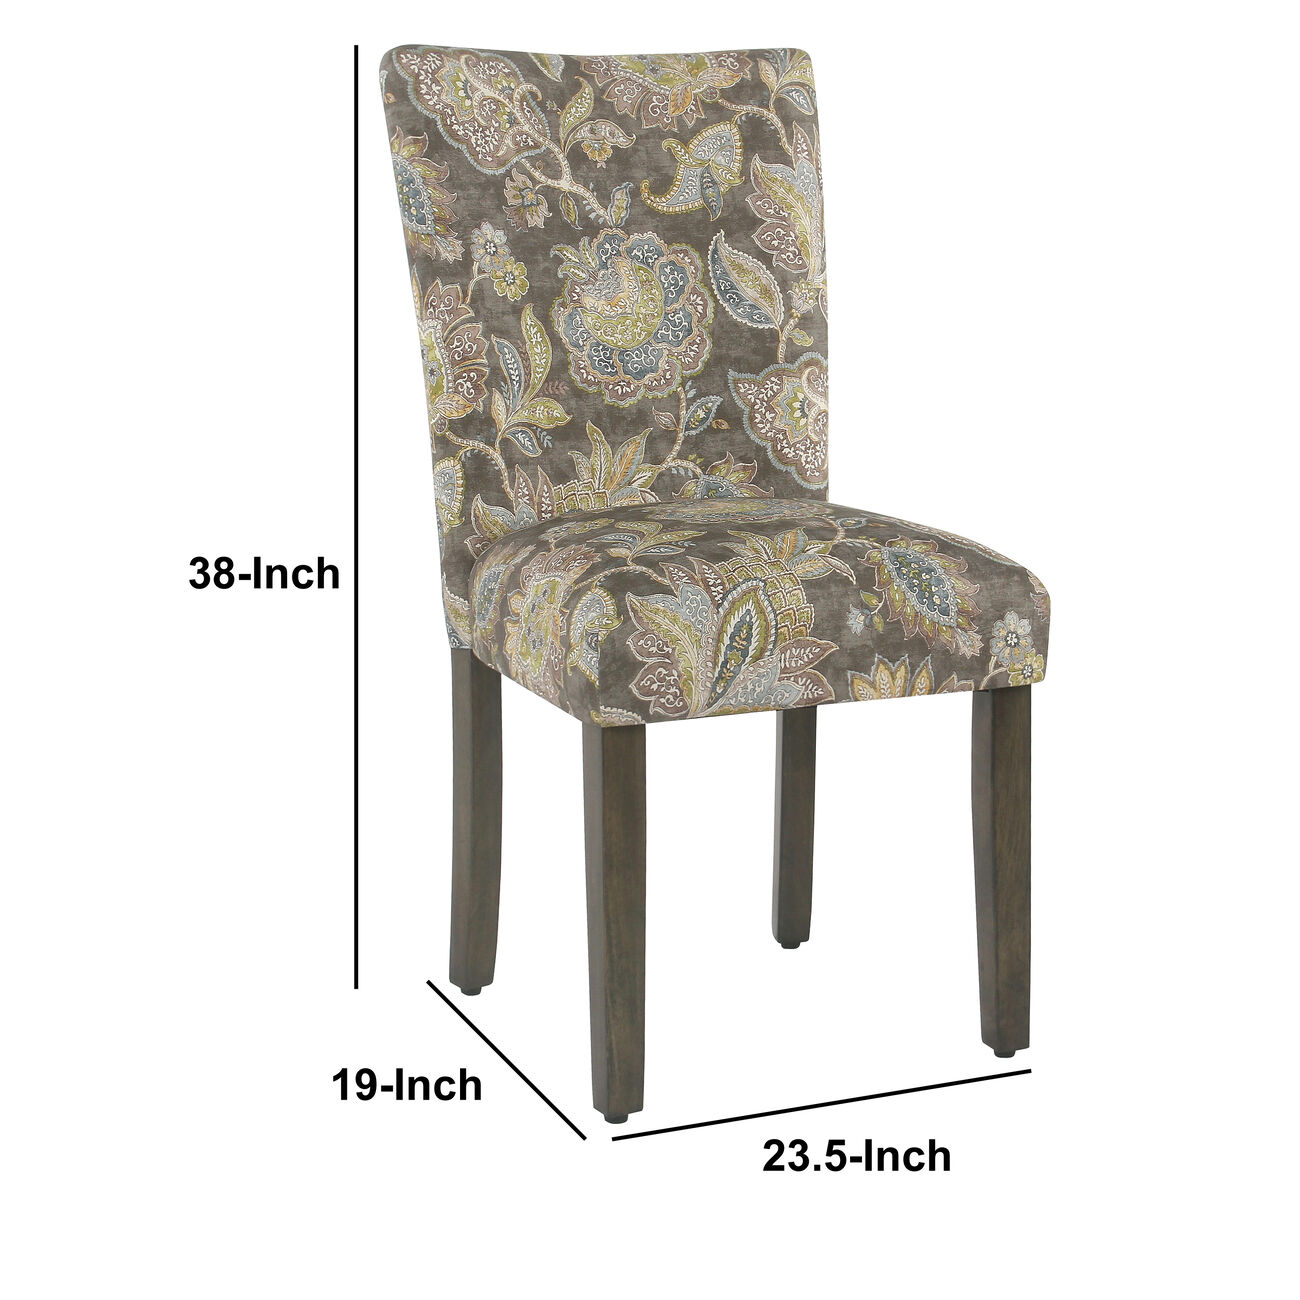 Floral Print Fabric Upholstered Parsons Chair with Wooden Legs, Multicolor, Set of Two